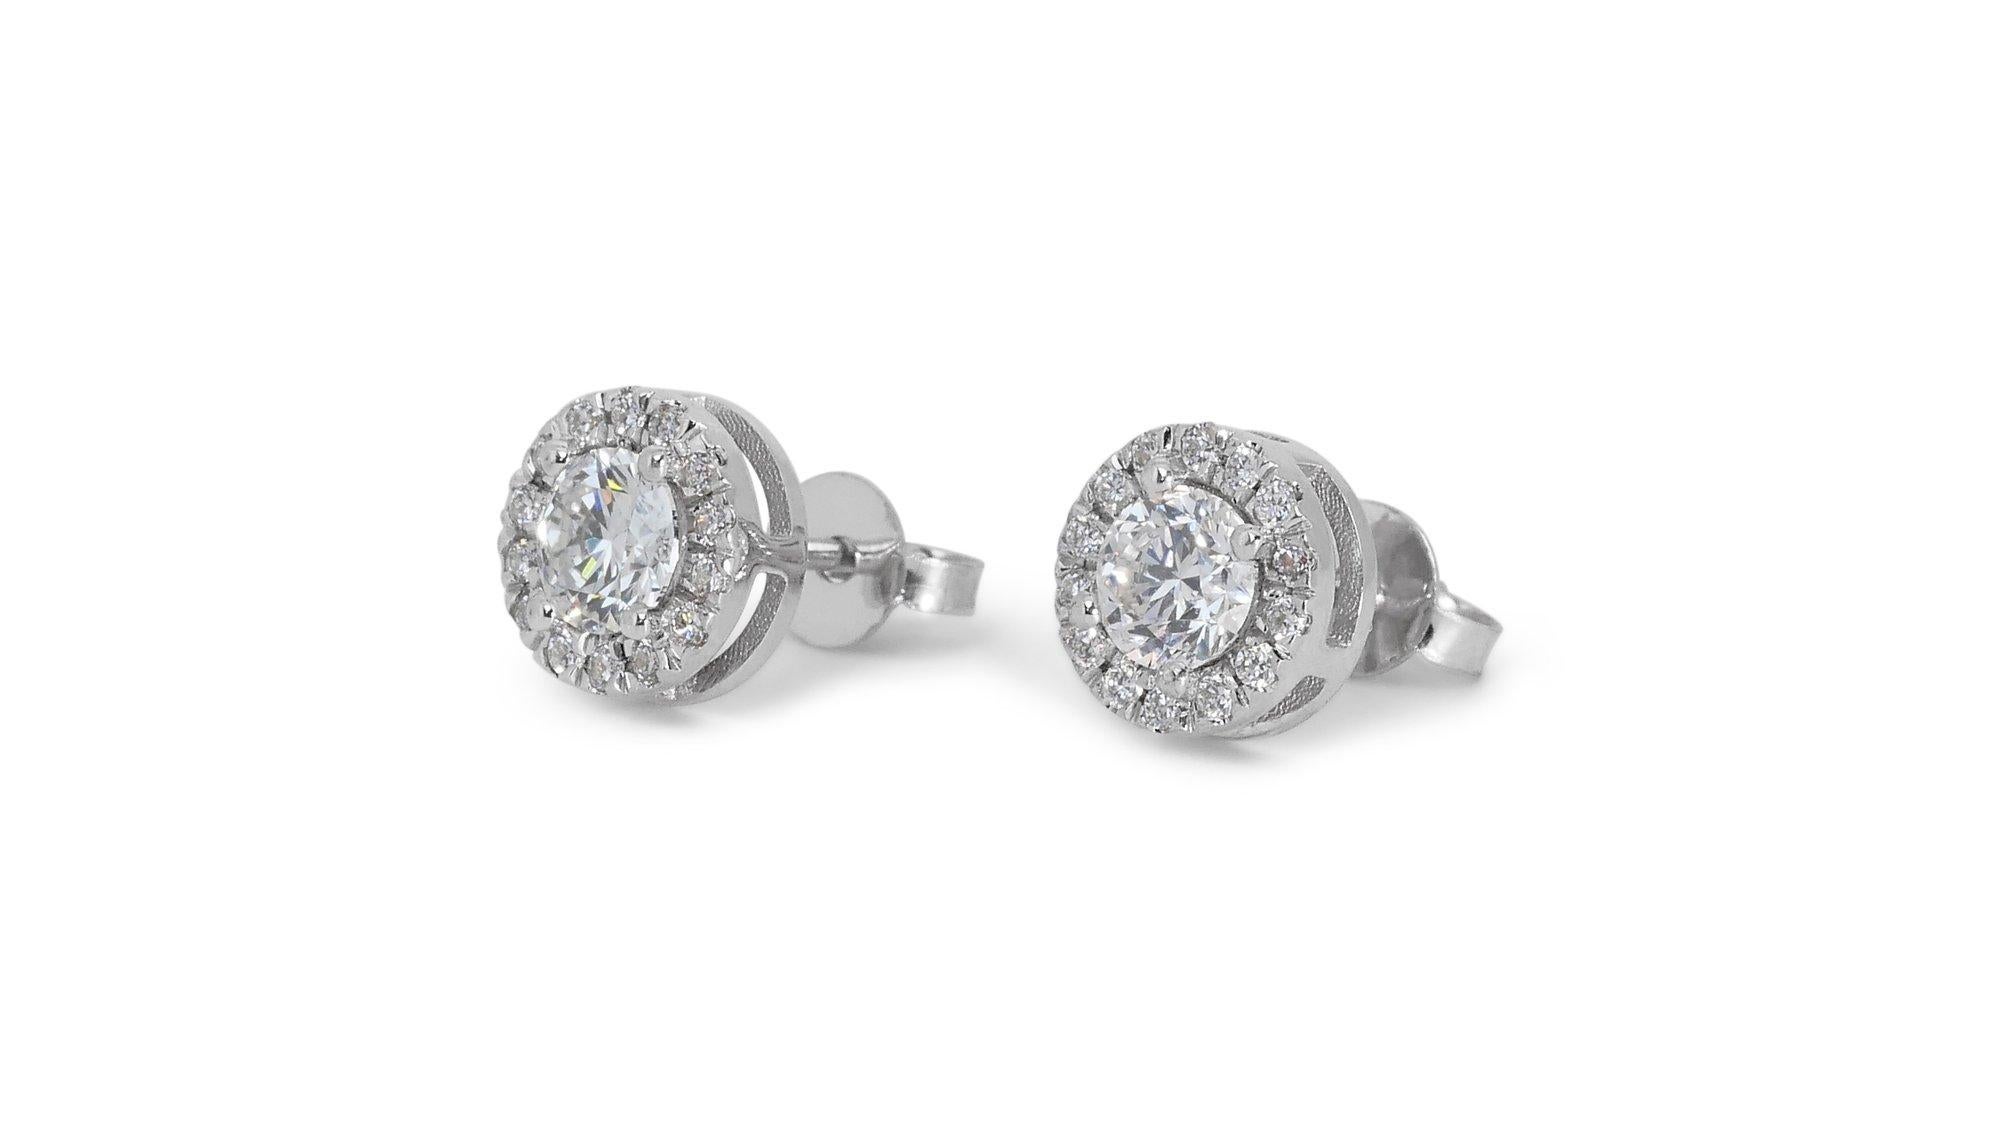 Dazzling 1.65ct Diamond Halo Stud Earrings in 18k White Gold - GIA Certified For Sale 3